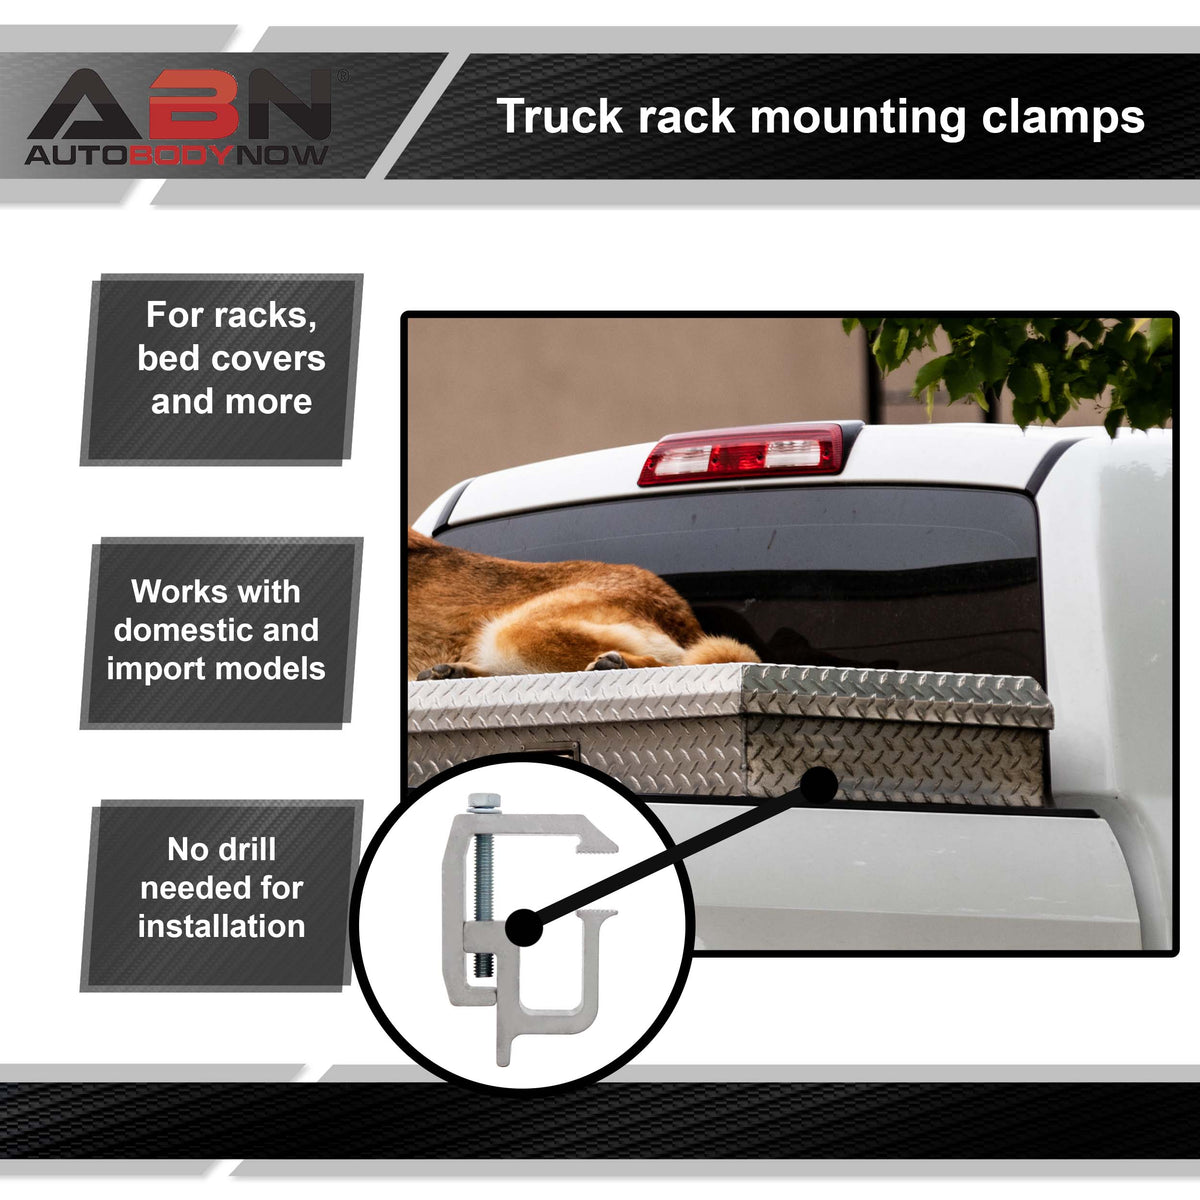 Truck Topper Clamps - 2 Pack Canopy and Truck Cap Mounting Clamps